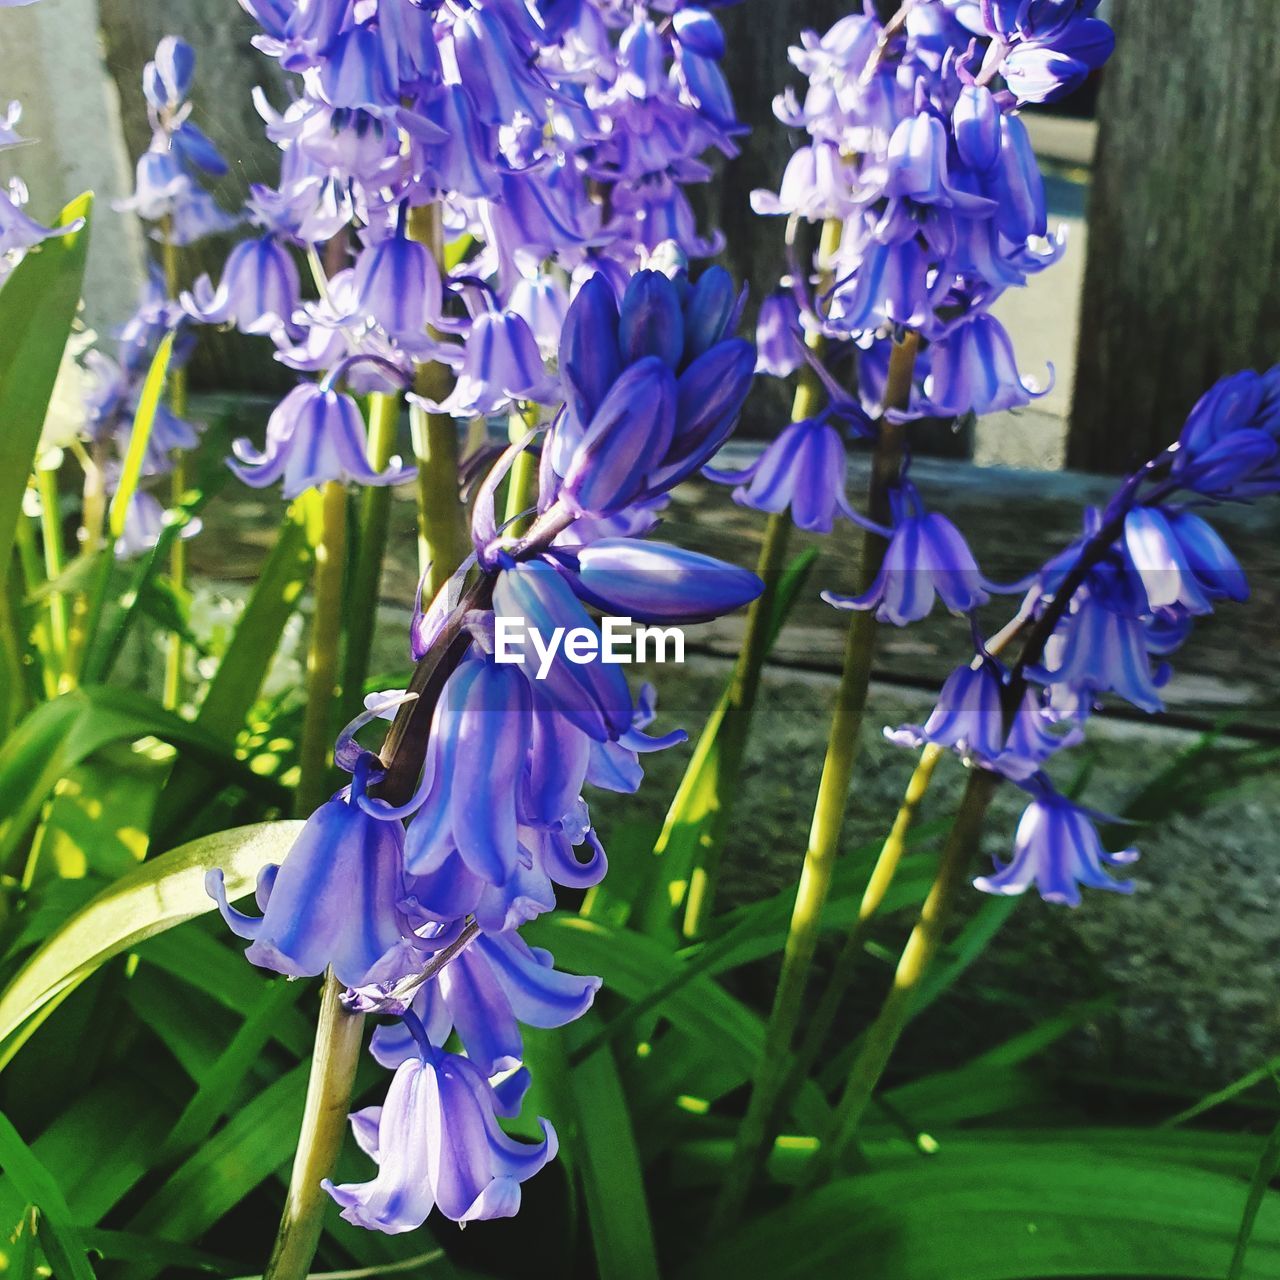 plant, flower, flowering plant, beauty in nature, freshness, purple, fragility, growth, petal, close-up, nature, inflorescence, flower head, no people, day, blue, springtime, blossom, botany, focus on foreground, iris, leaf, plant part, wildflower, outdoors